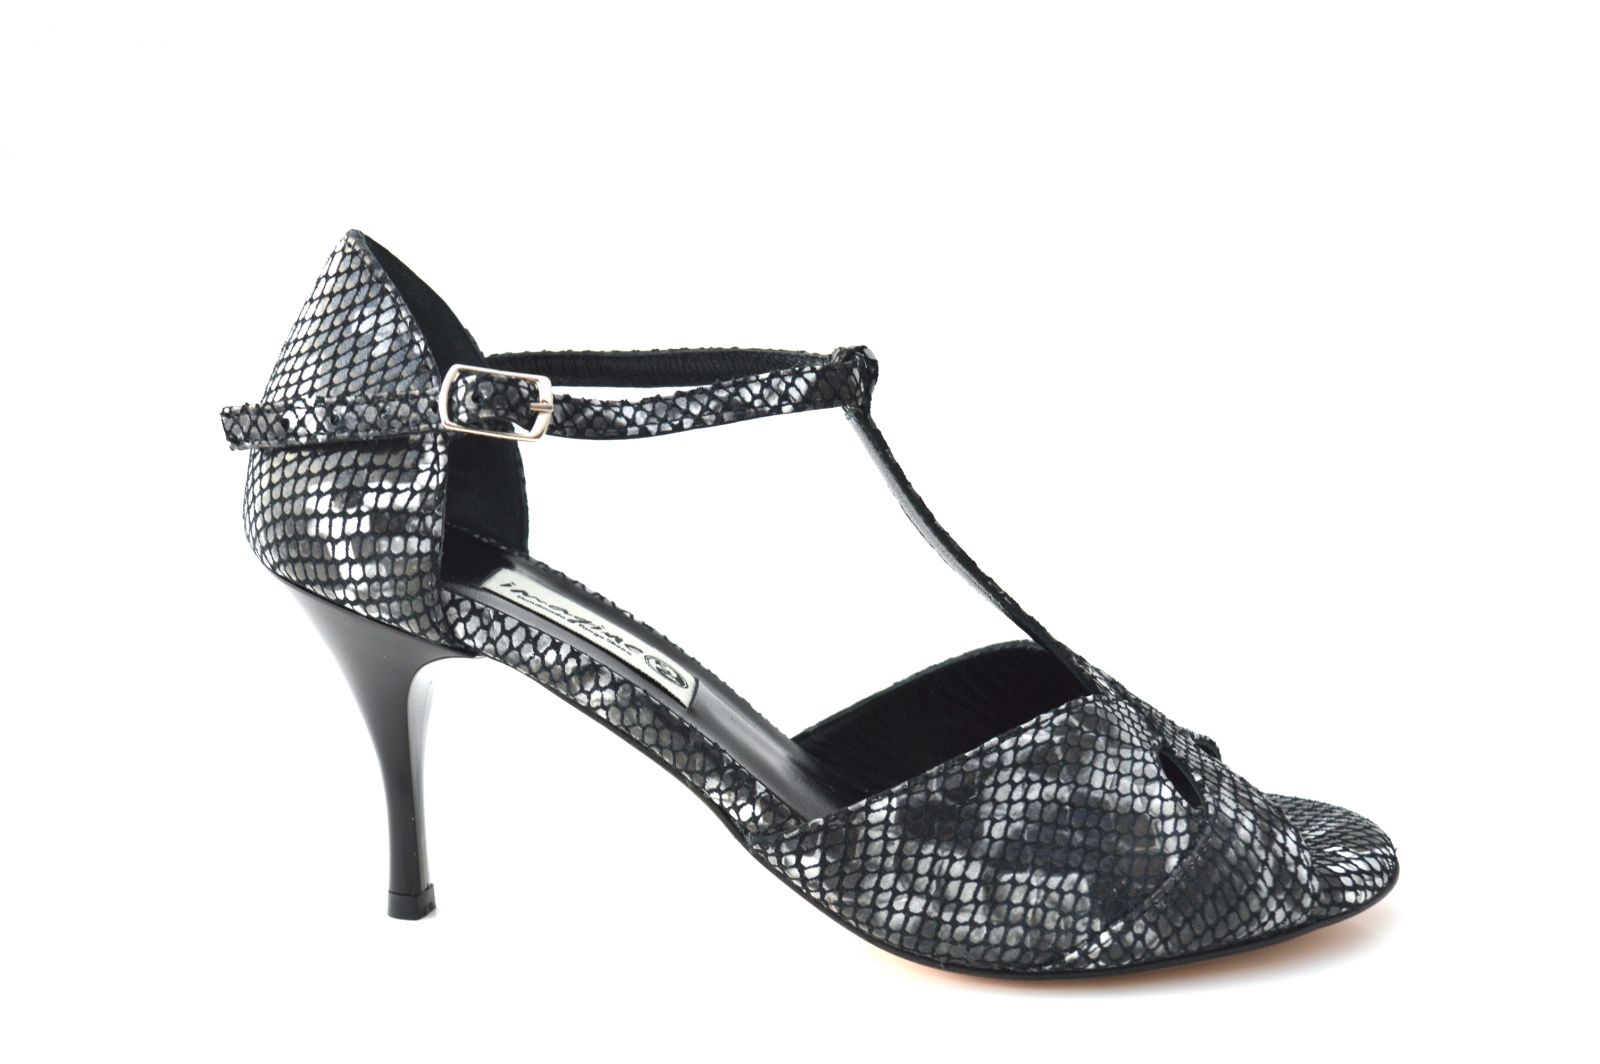 Women argentine tango dance shoes, peep toe, in black-white faux-snake leather